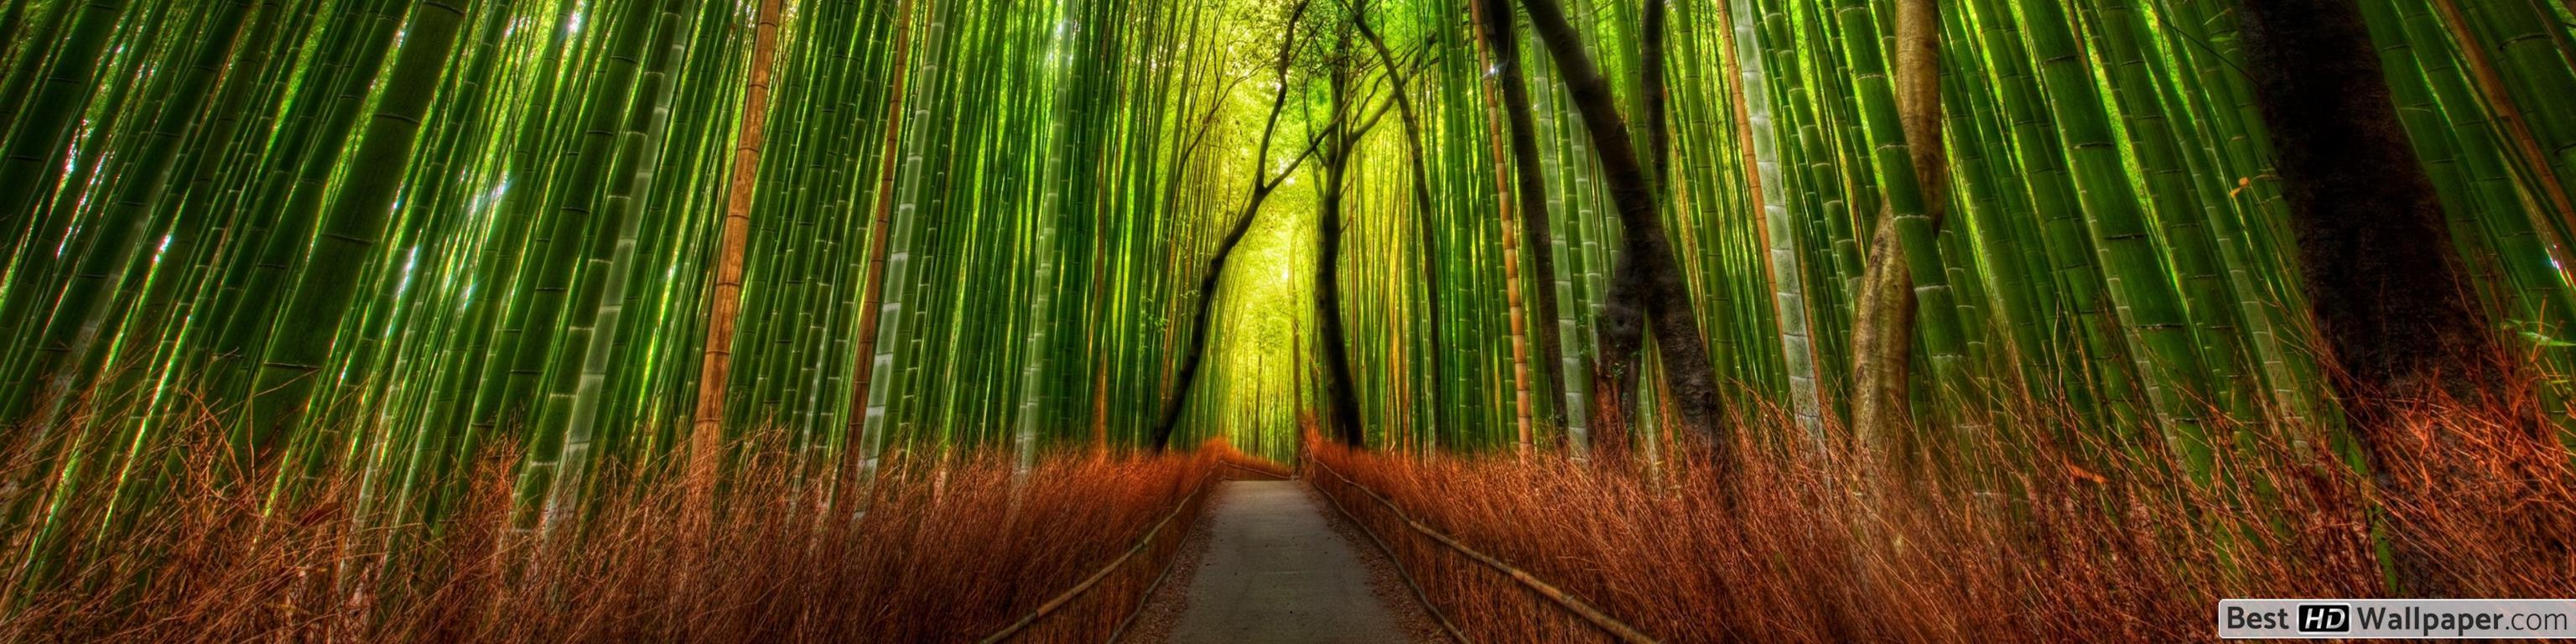 Bamboo trees and forest HD wallpaper download